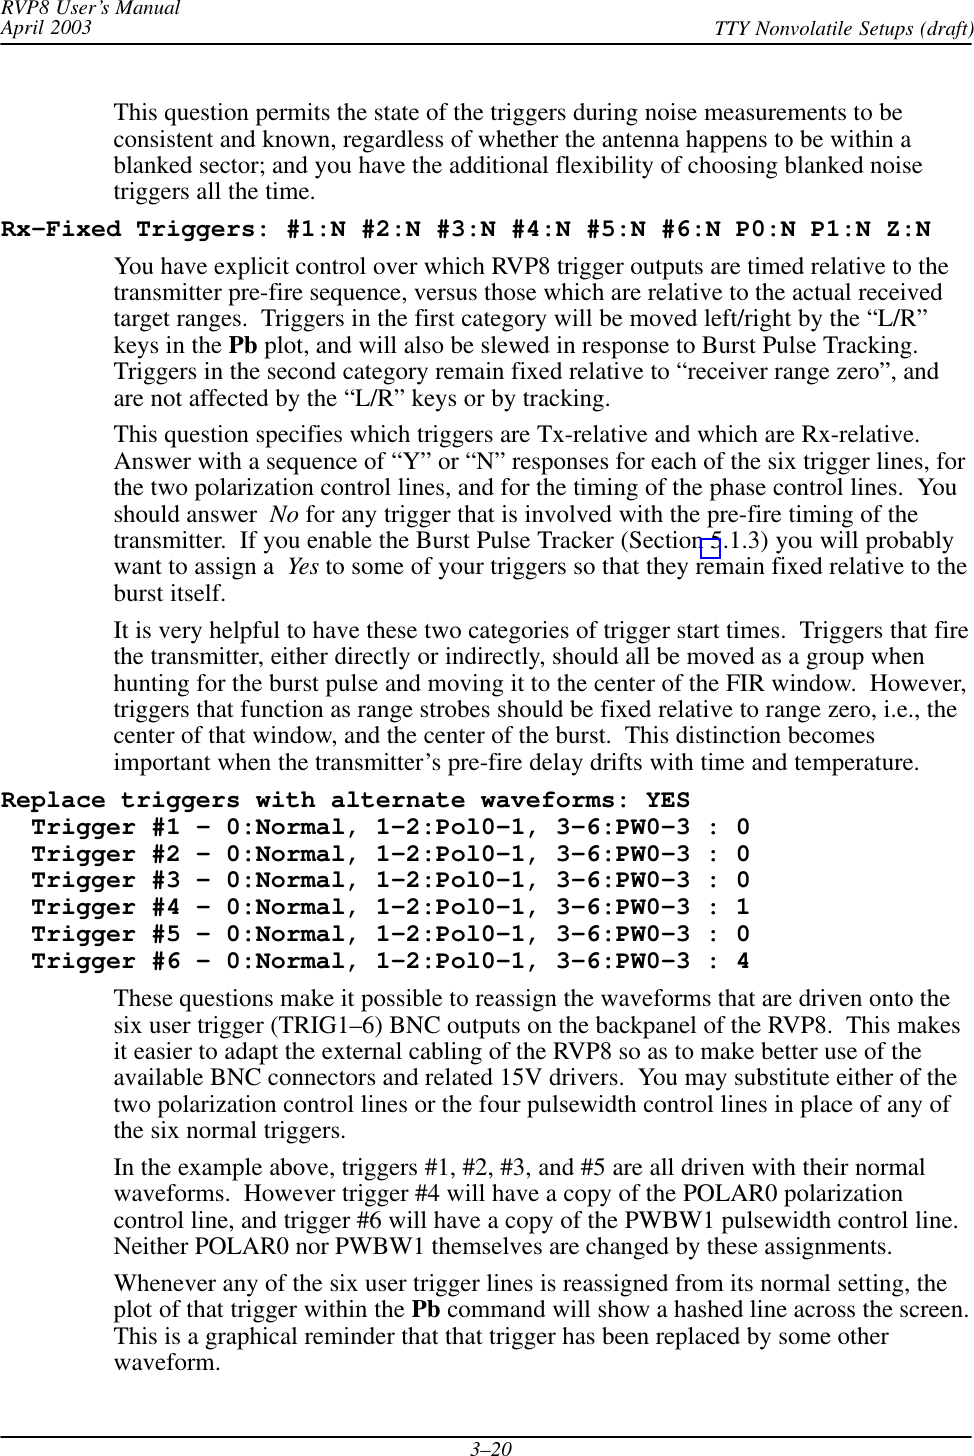 RVP8 User’s ManualApril 2003 TTY Nonvolatile Setups (draft)3–20This question permits the state of the triggers during noise measurements to beconsistent and known, regardless of whether the antenna happens to be within ablanked sector; and you have the additional flexibility of choosing blanked noisetriggers all the time.Rx–Fixed Triggers: #1:N #2:N #3:N #4:N #5:N #6:N P0:N P1:N Z:NYou have explicit control over which RVP8 trigger outputs are timed relative to thetransmitter pre-fire sequence, versus those which are relative to the actual receivedtarget ranges.  Triggers in the first category will be moved left/right by the “L/R”keys in the Pb plot, and will also be slewed in response to Burst Pulse Tracking.Triggers in the second category remain fixed relative to “receiver range zero”, andare not affected by the “L/R” keys or by tracking.This question specifies which triggers are Tx-relative and which are Rx-relative.Answer with a sequence of “Y” or “N” responses for each of the six trigger lines, forthe two polarization control lines, and for the timing of the phase control lines.  Youshould answer  No for any trigger that is involved with the pre-fire timing of thetransmitter.  If you enable the Burst Pulse Tracker (Section 5.1.3) you will probablywant to assign a  Yes to some of your triggers so that they remain fixed relative to theburst itself.It is very helpful to have these two categories of trigger start times.  Triggers that firethe transmitter, either directly or indirectly, should all be moved as a group whenhunting for the burst pulse and moving it to the center of the FIR window.  However,triggers that function as range strobes should be fixed relative to range zero, i.e., thecenter of that window, and the center of the burst.  This distinction becomesimportant when the transmitter’s pre-fire delay drifts with time and temperature.Replace triggers with alternate waveforms: YES  Trigger #1 – 0:Normal, 1–2:Pol0–1, 3–6:PW0–3 : 0  Trigger #2 – 0:Normal, 1–2:Pol0–1, 3–6:PW0–3 : 0  Trigger #3 – 0:Normal, 1–2:Pol0–1, 3–6:PW0–3 : 0  Trigger #4 – 0:Normal, 1–2:Pol0–1, 3–6:PW0–3 : 1  Trigger #5 – 0:Normal, 1–2:Pol0–1, 3–6:PW0–3 : 0  Trigger #6 – 0:Normal, 1–2:Pol0–1, 3–6:PW0–3 : 4These questions make it possible to reassign the waveforms that are driven onto thesix user trigger (TRIG1–6) BNC outputs on the backpanel of the RVP8.  This makesit easier to adapt the external cabling of the RVP8 so as to make better use of theavailable BNC connectors and related 15V drivers.  You may substitute either of thetwo polarization control lines or the four pulsewidth control lines in place of any ofthe six normal triggers.In the example above, triggers #1, #2, #3, and #5 are all driven with their normalwaveforms.  However trigger #4 will have a copy of the POLAR0 polarizationcontrol line, and trigger #6 will have a copy of the PWBW1 pulsewidth control line.Neither POLAR0 nor PWBW1 themselves are changed by these assignments.Whenever any of the six user trigger lines is reassigned from its normal setting, theplot of that trigger within the Pb command will show a hashed line across the screen.This is a graphical reminder that that trigger has been replaced by some otherwaveform.